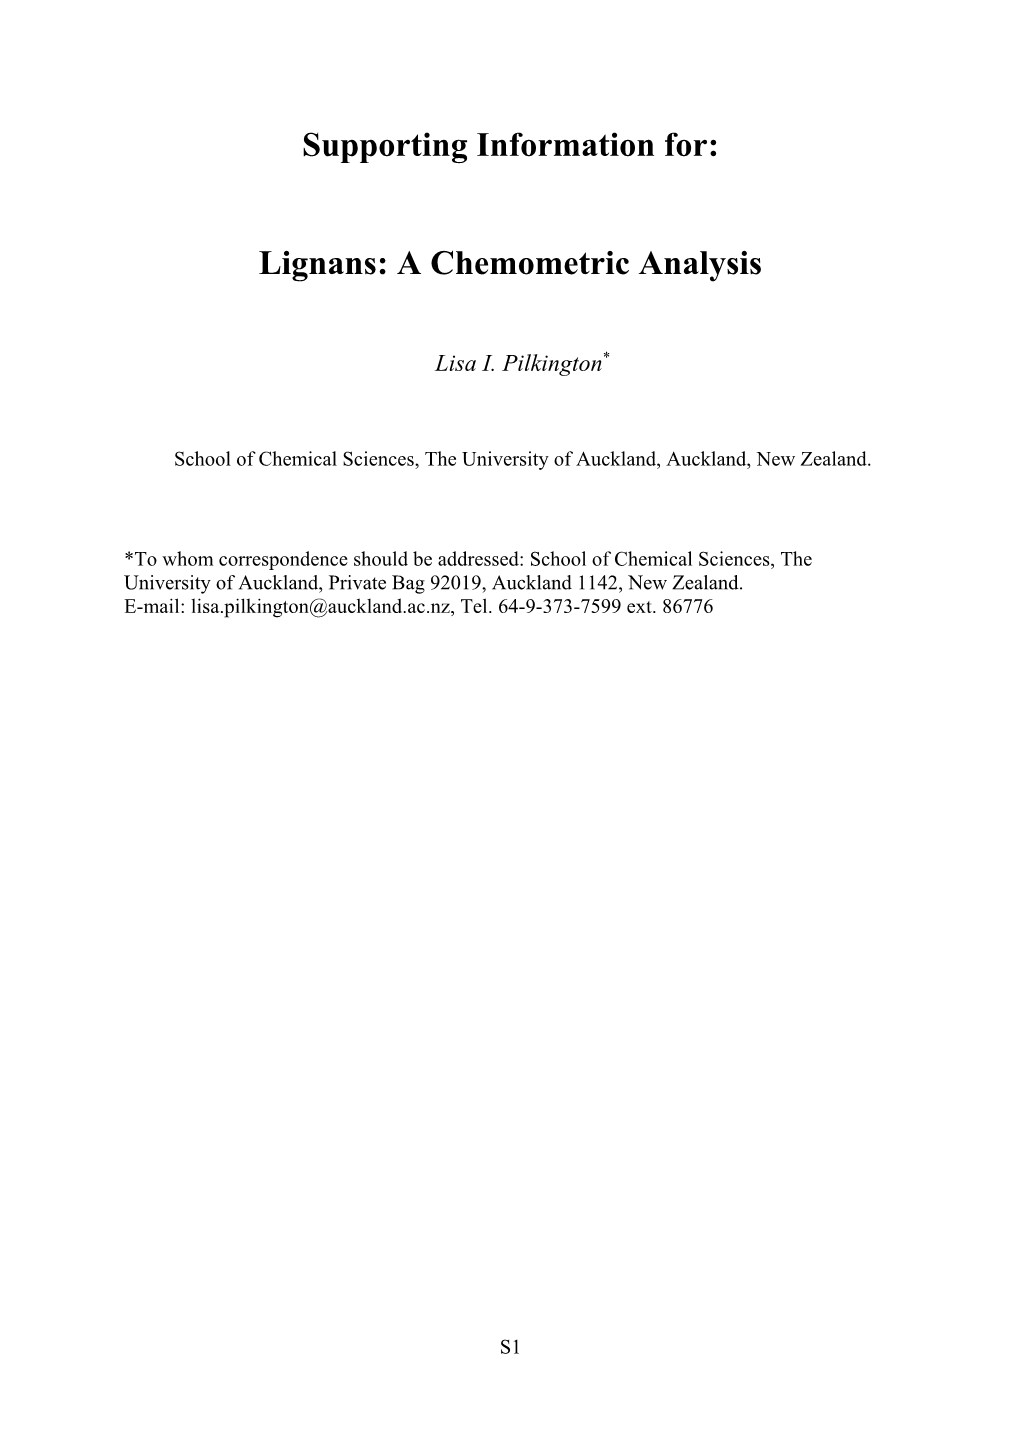 Supporting Information For: Lignans: a Chemometric Analysis